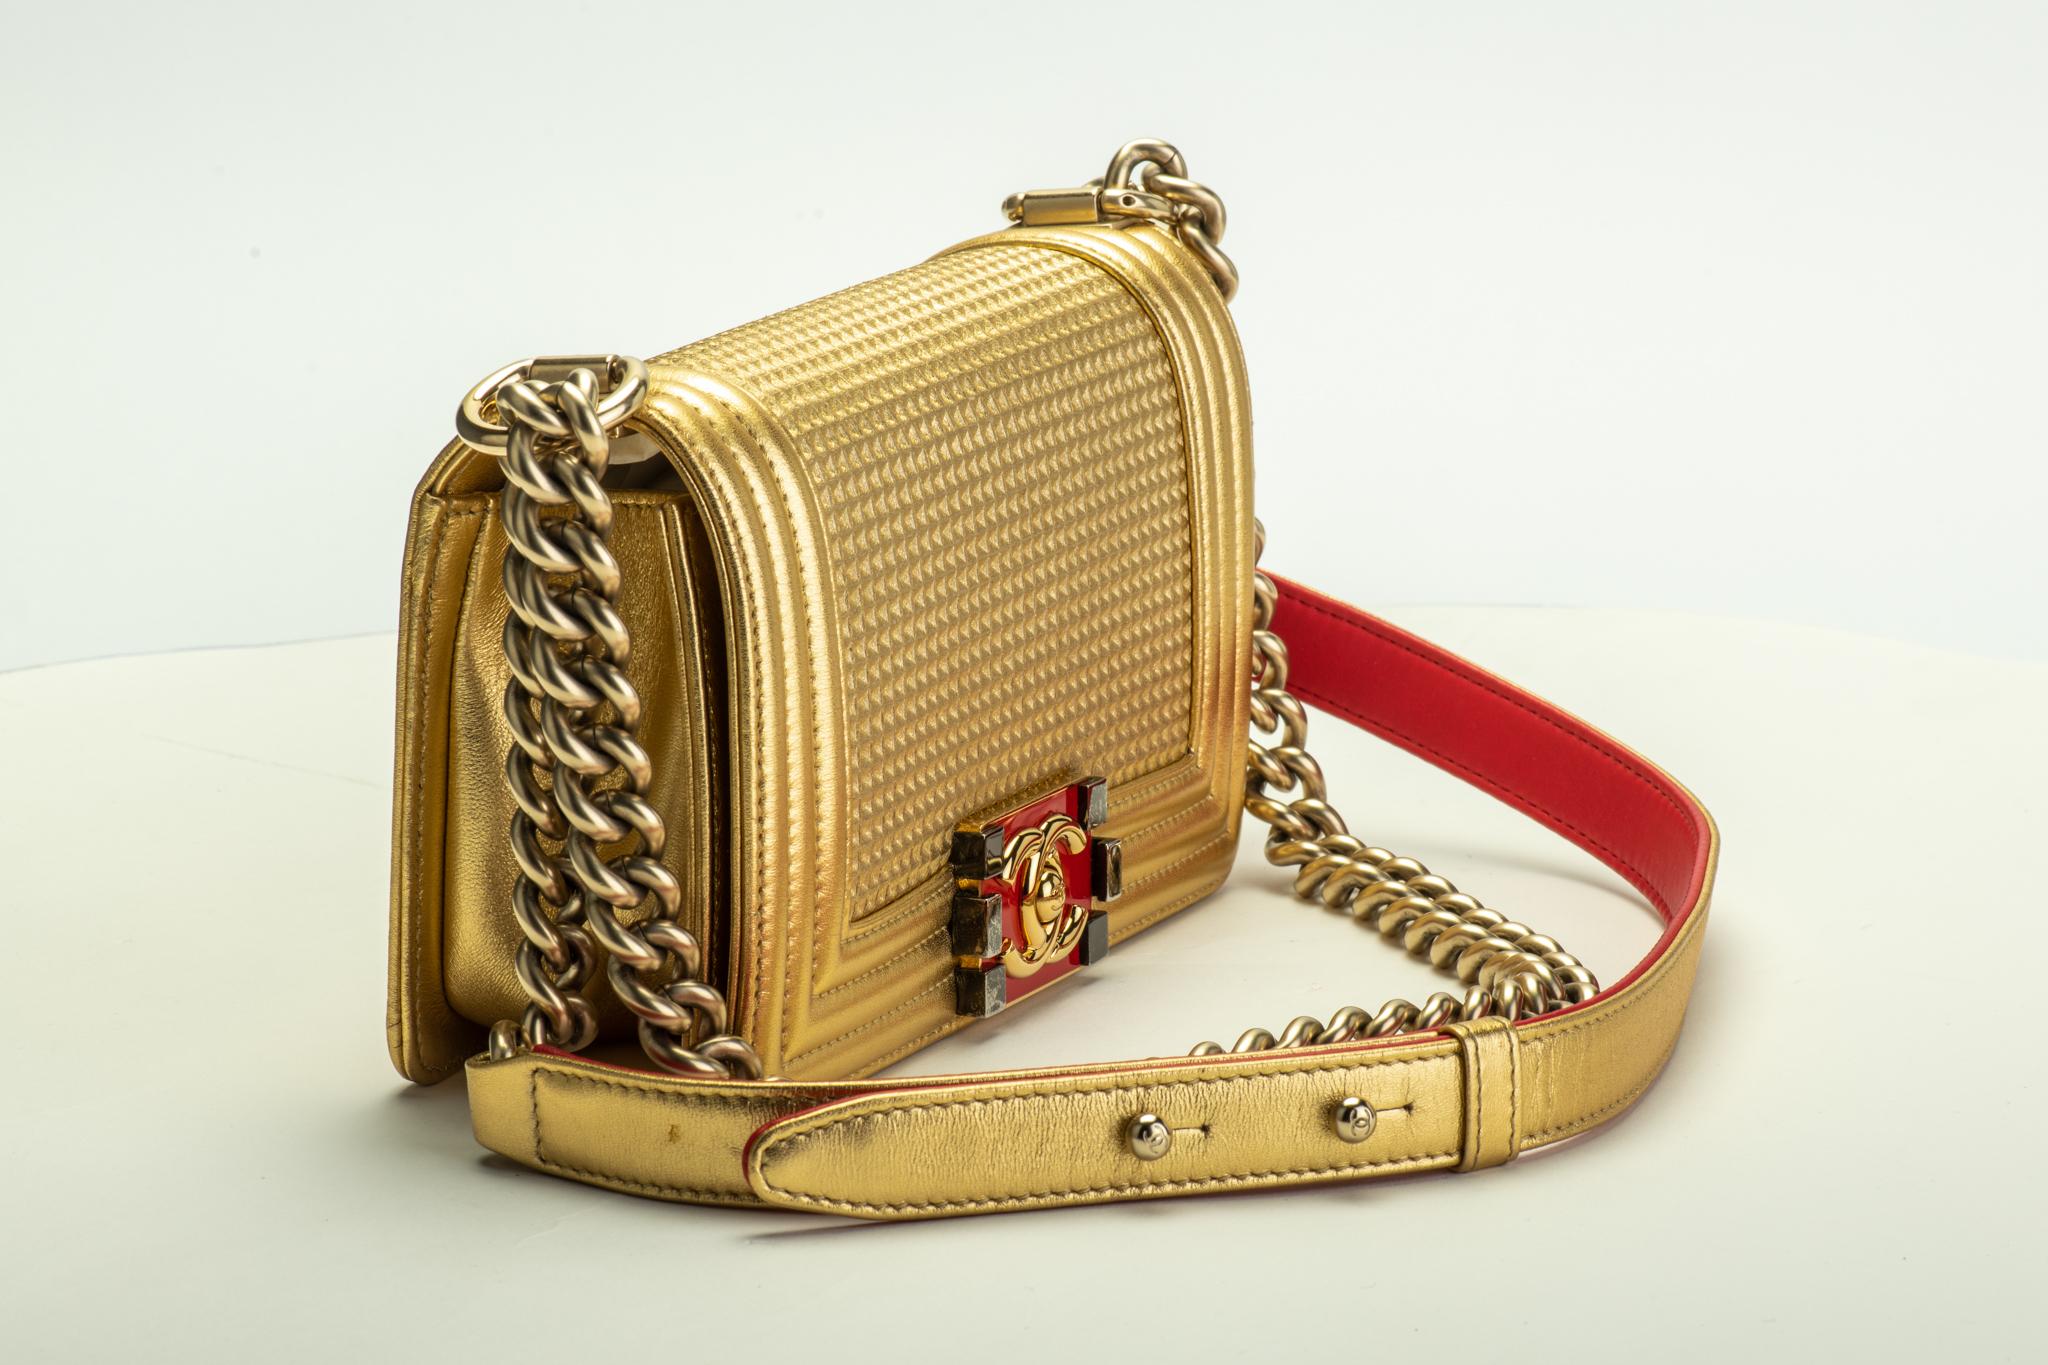 Chanel mint condition small gold boy bag with red details. Shoulder drop, 11